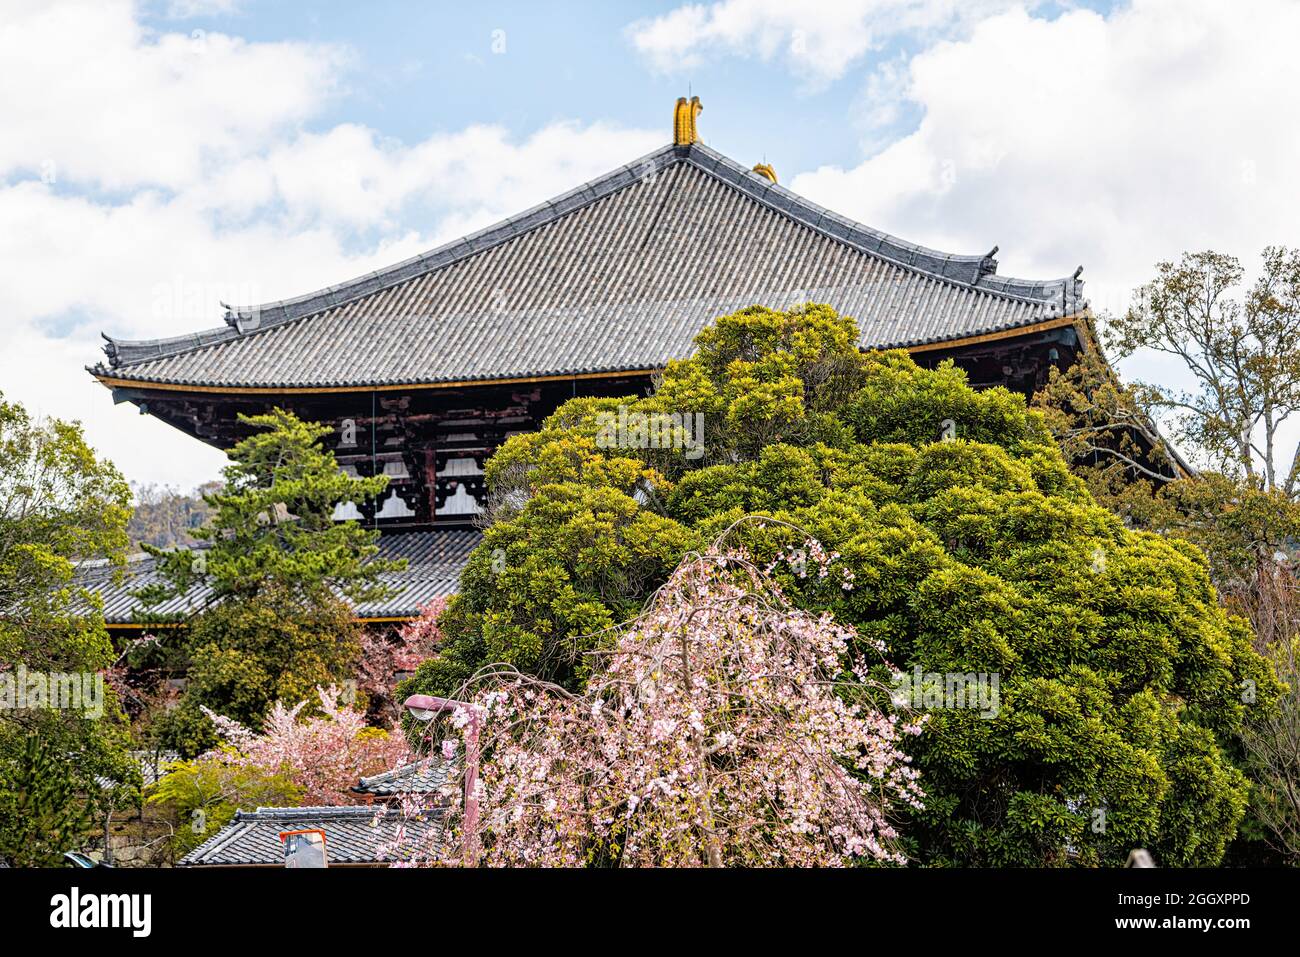 Nara, Japan Todaiji temple in city during day with view of pagoda tower roof tiles and cherry blossom tree flowers and sky Stock Photo